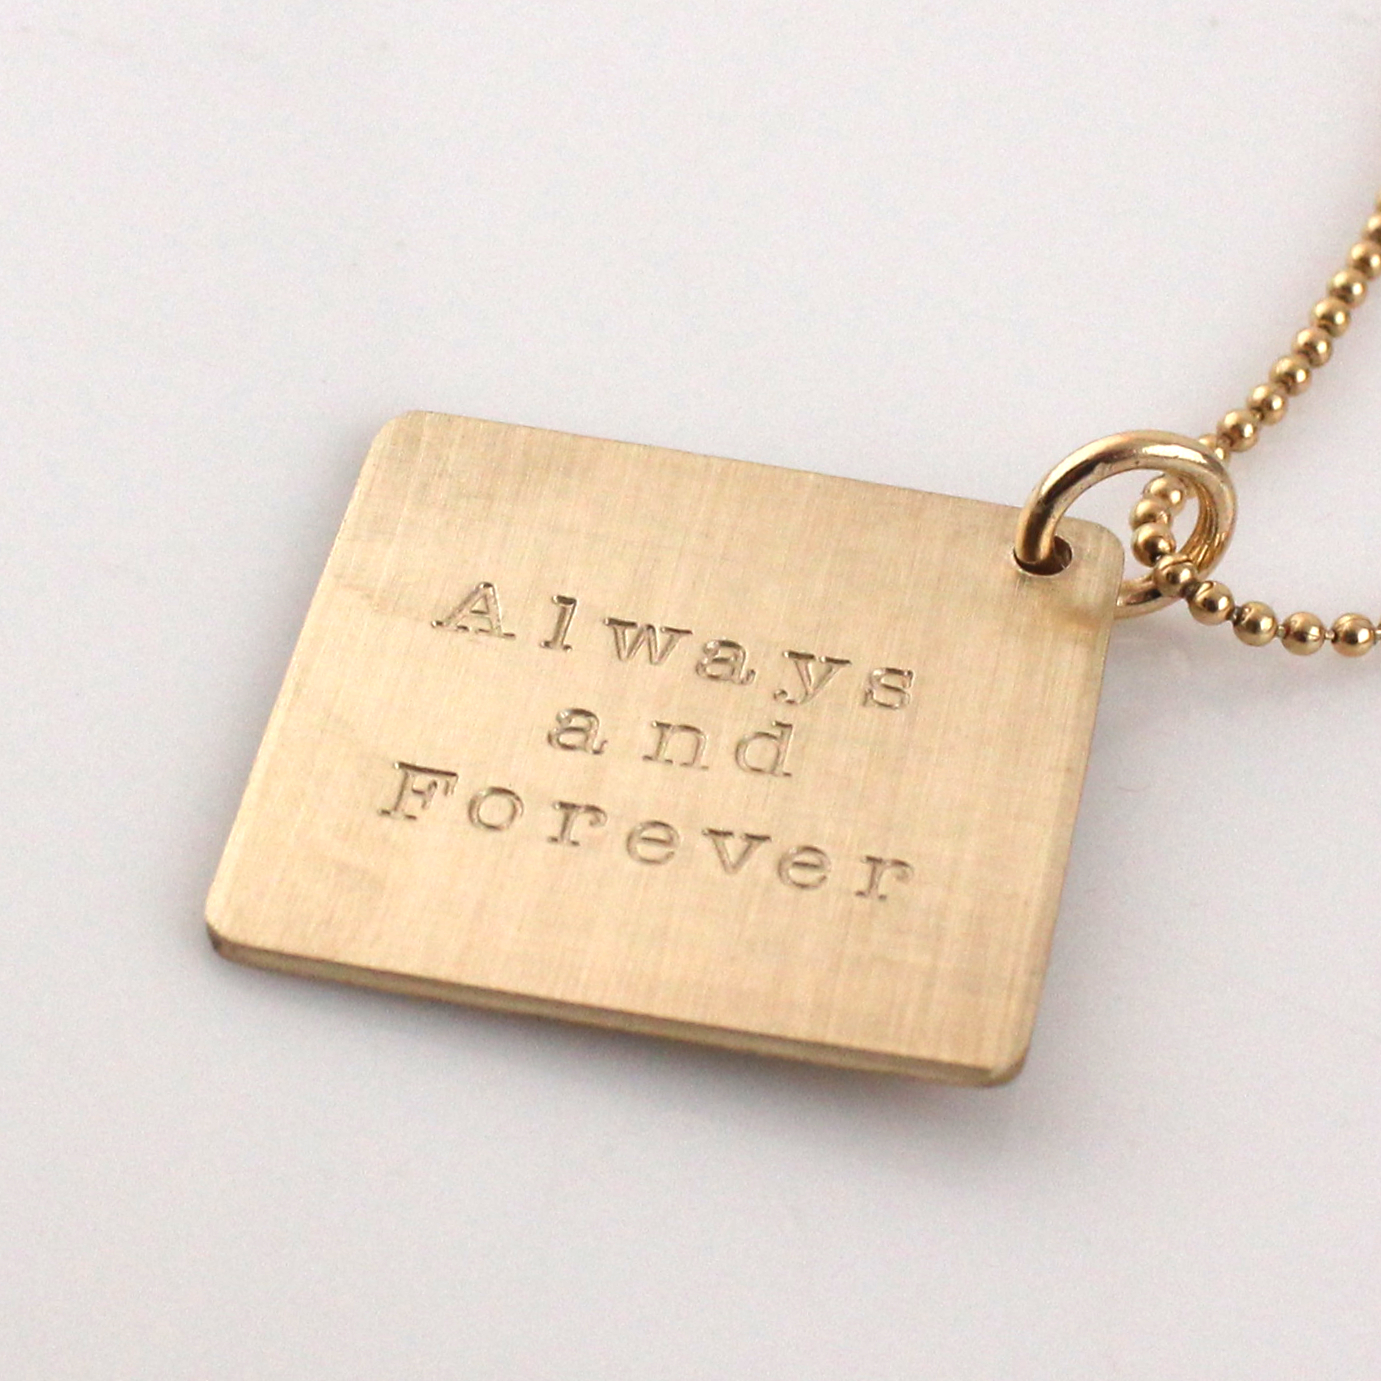 Buy Personalized Calendar Necklace Gold Filled Mark Your Calendar Necklace  Hand Stamped and Personalized Brushed Finish Online in India - Etsy